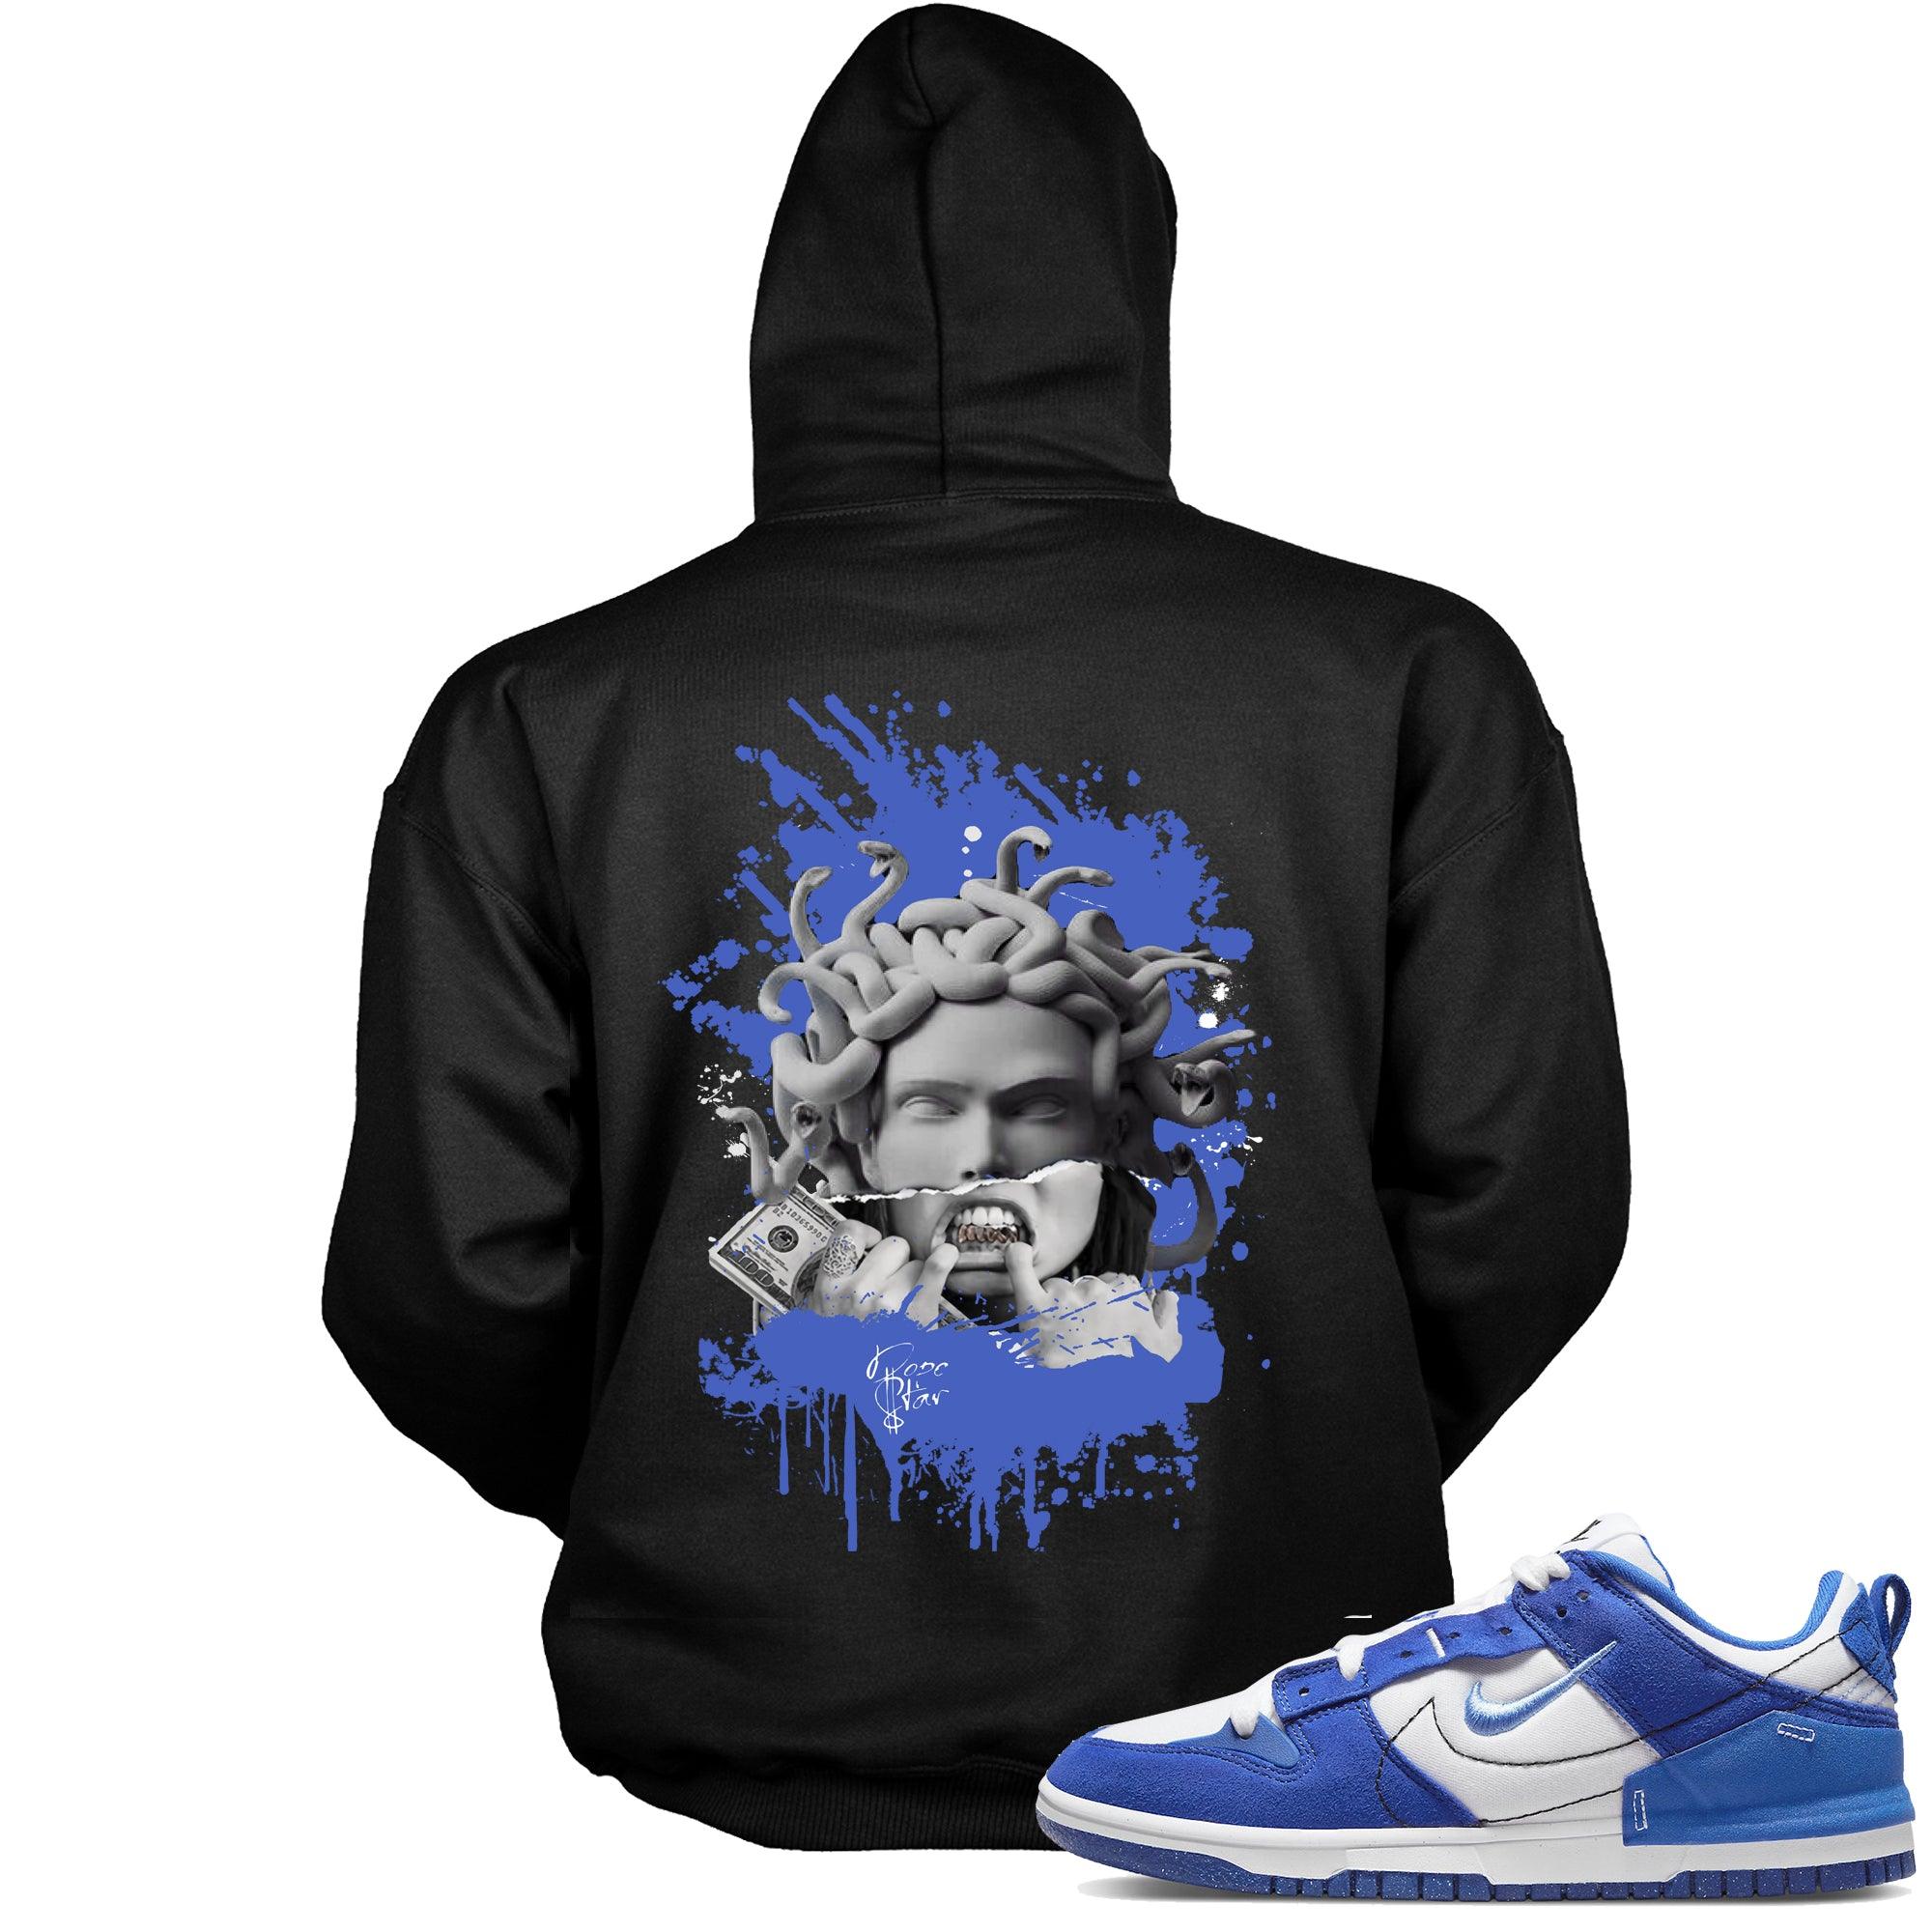 Cool Black Graphic Hoodie with “ MEDUSA “ print, that perfectly matches Nike Dunk Disrupt 2 Hyper Royal sneakers